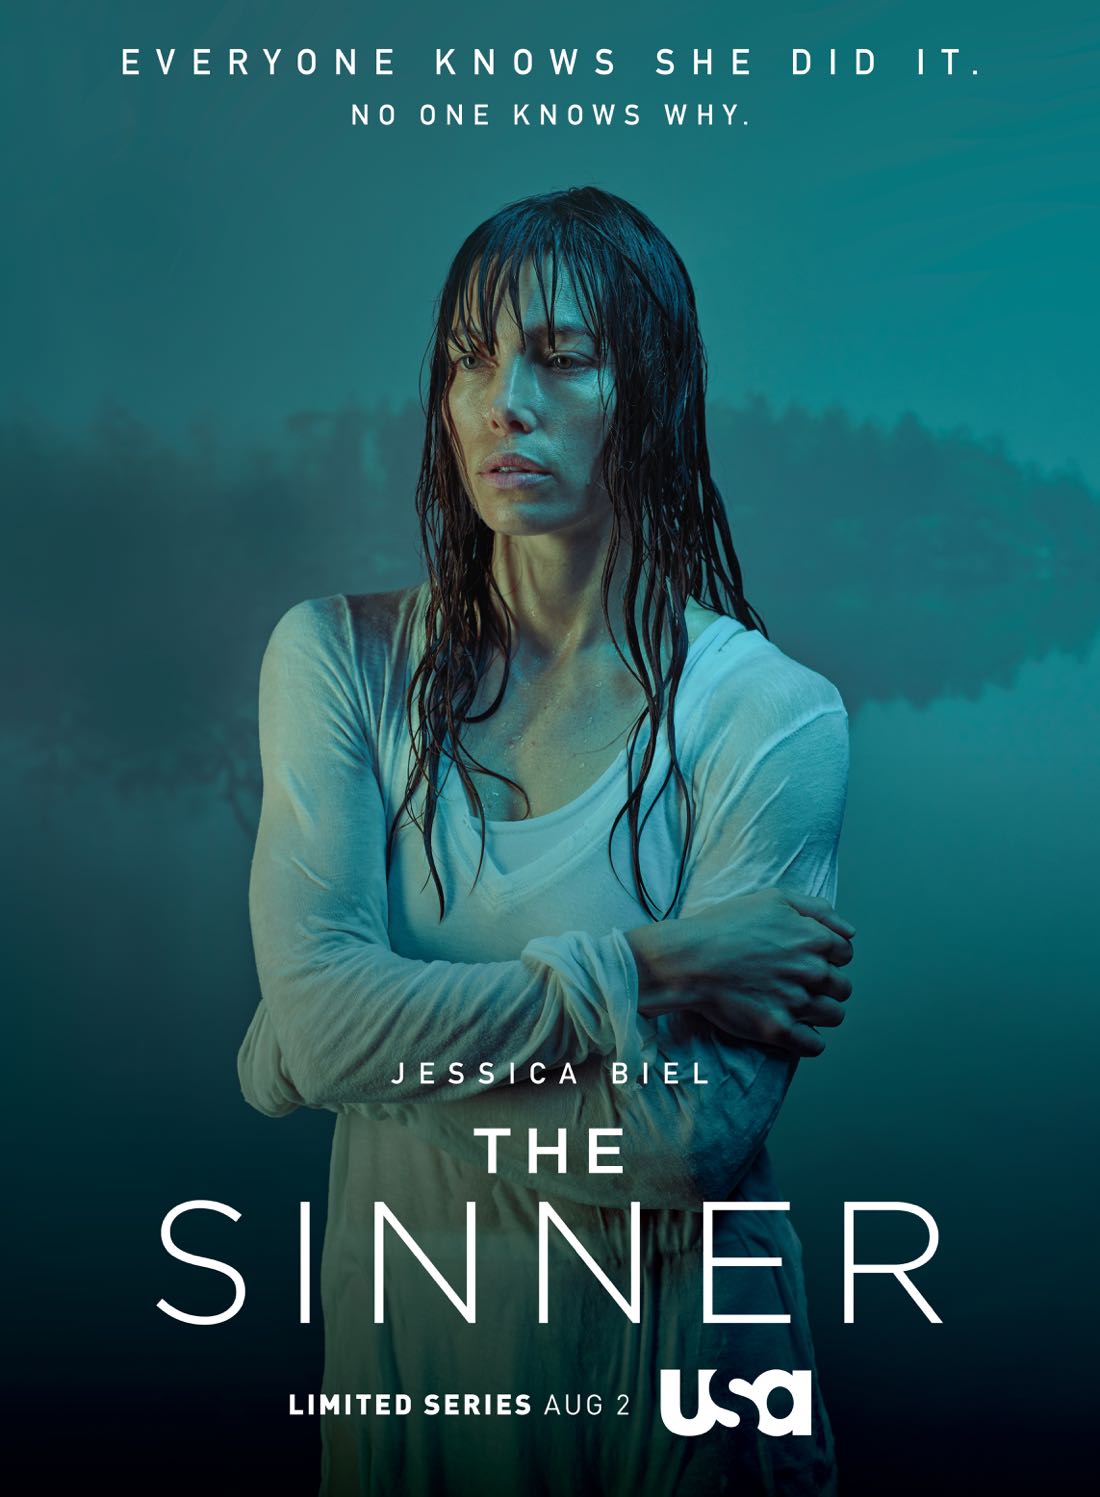 Poster-For-New-USA-Series-THE-SINNER-Starring-Jessica-Biel-